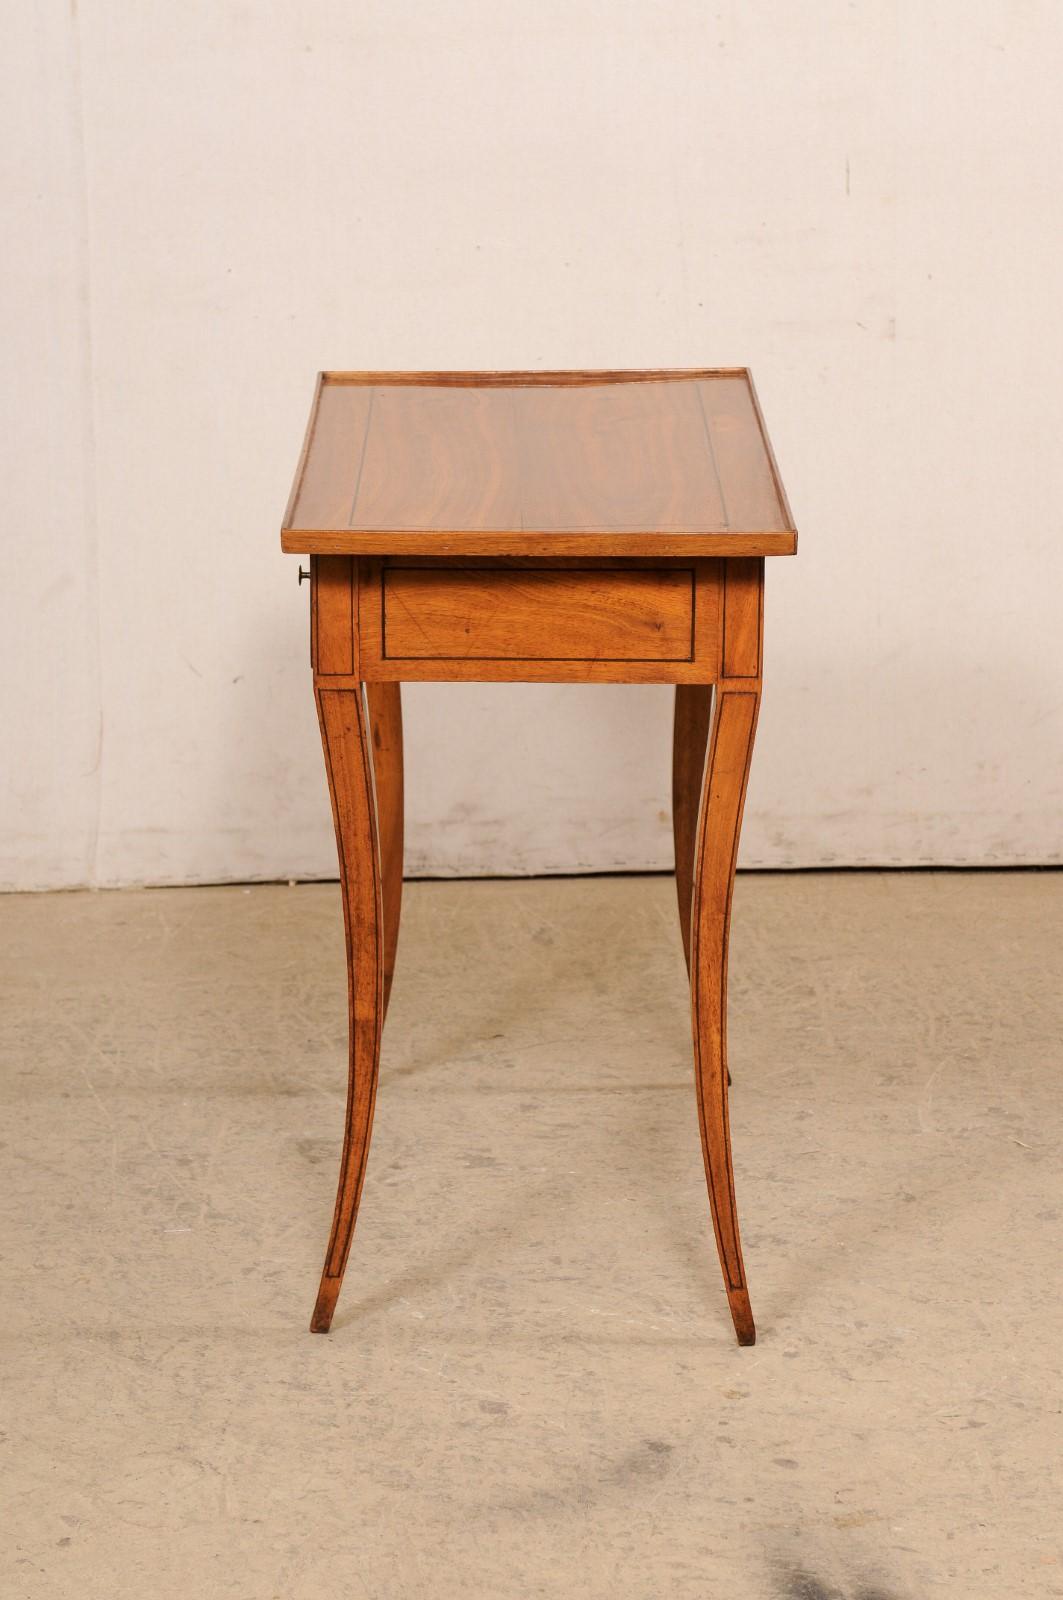 An Early 19th C. Italian Occasional Table w/Inlay Accents & Elegant Sabre Legs For Sale 5